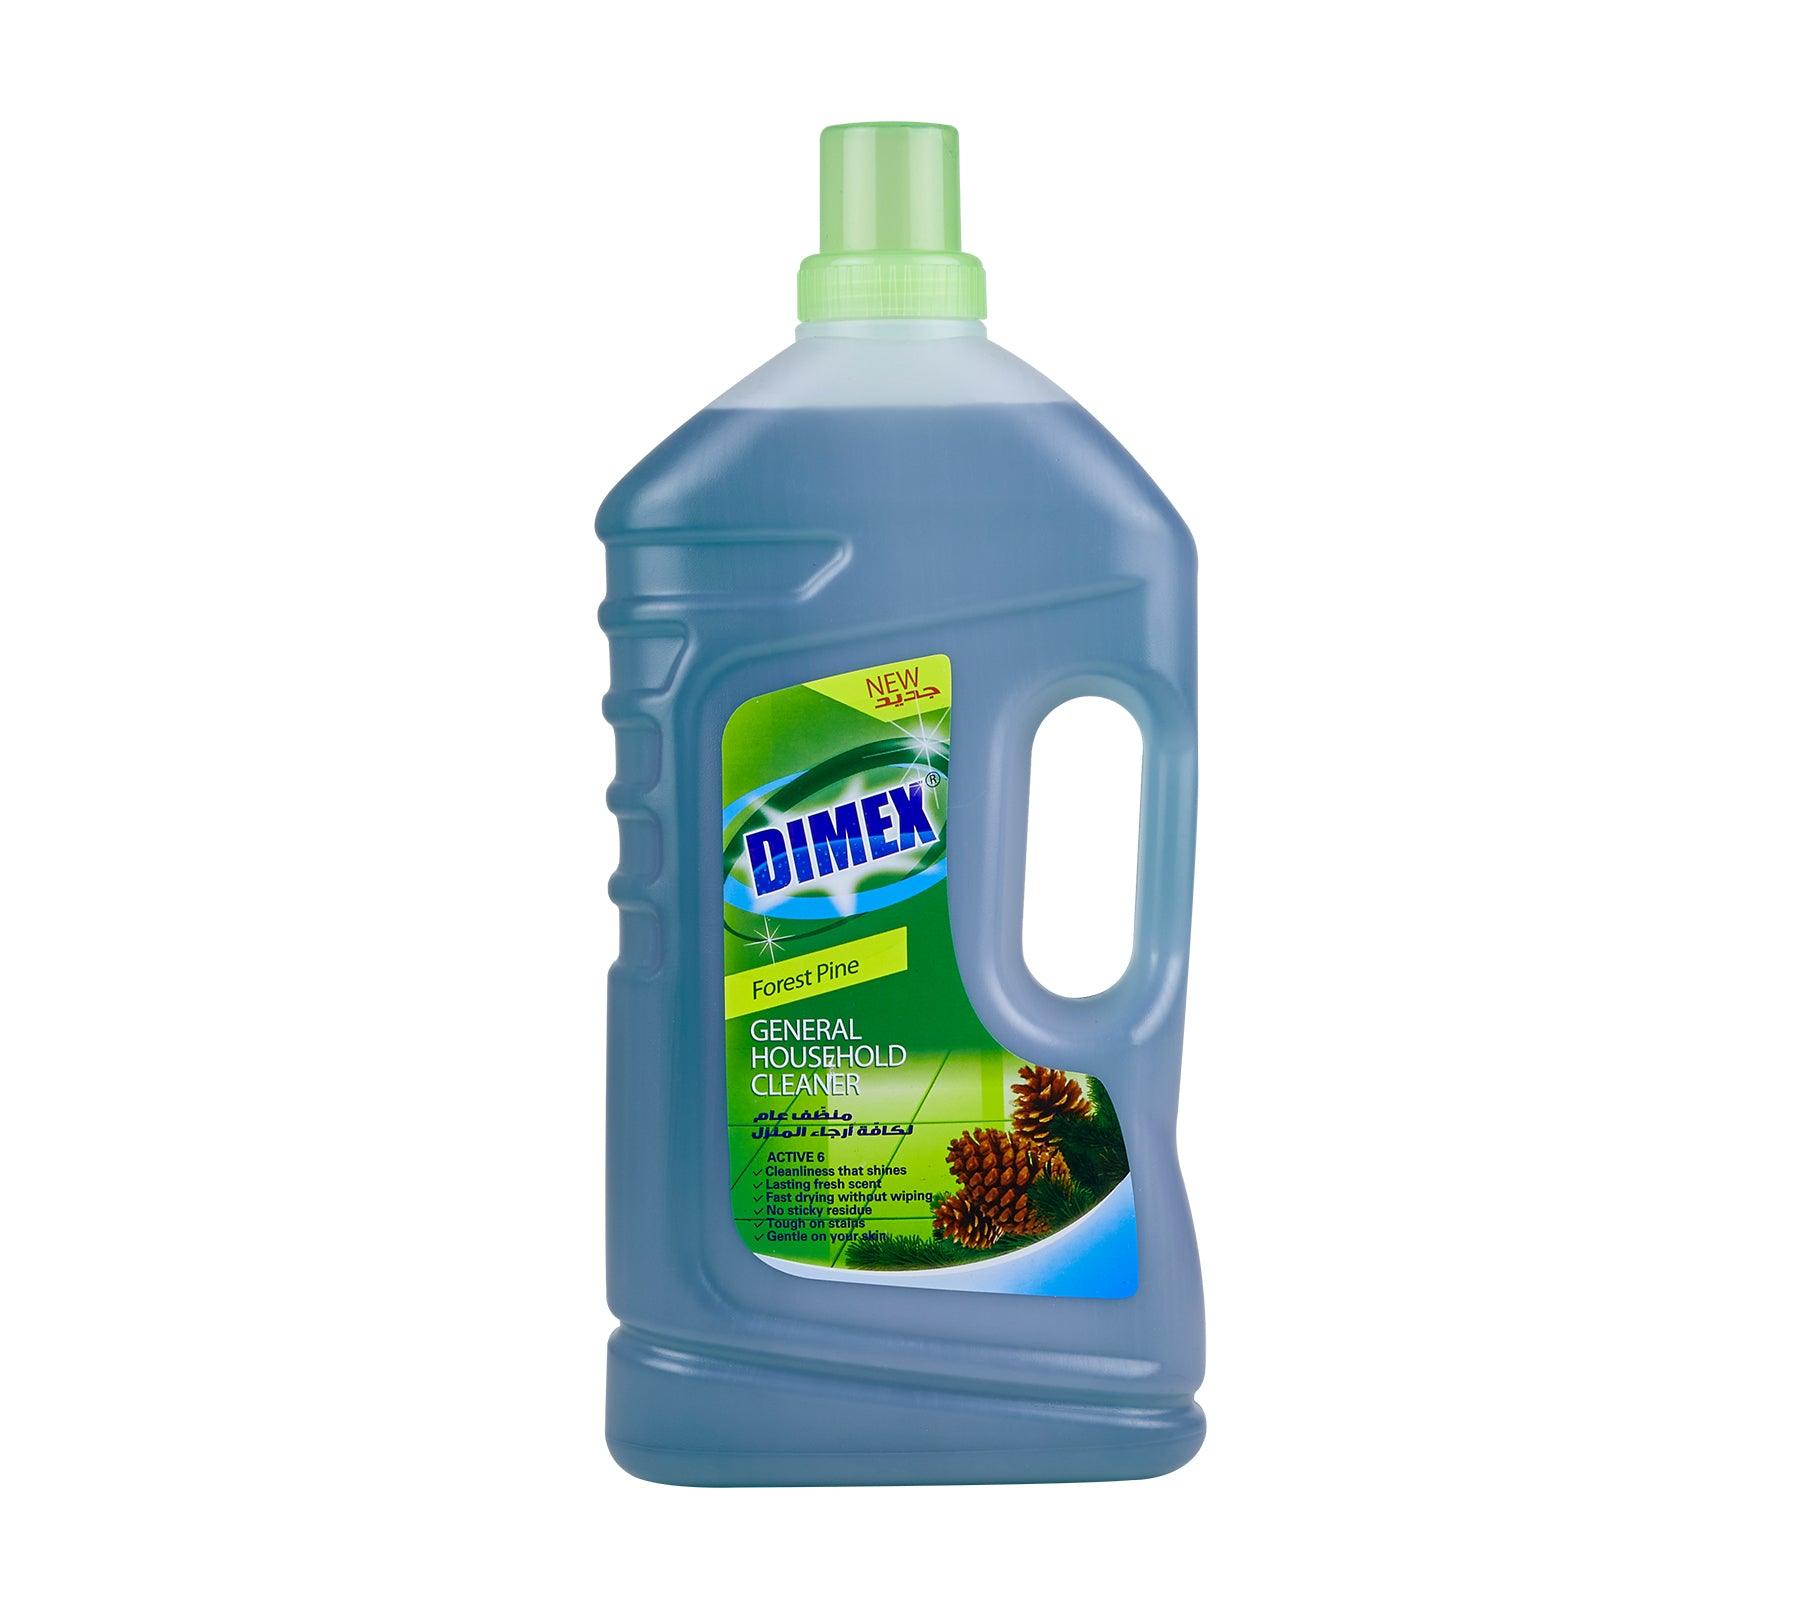 Elsada Dimex General Household Cleaner Pine 800ml - Karout Online -Karout Online Shopping In lebanon - Karout Express Delivery 